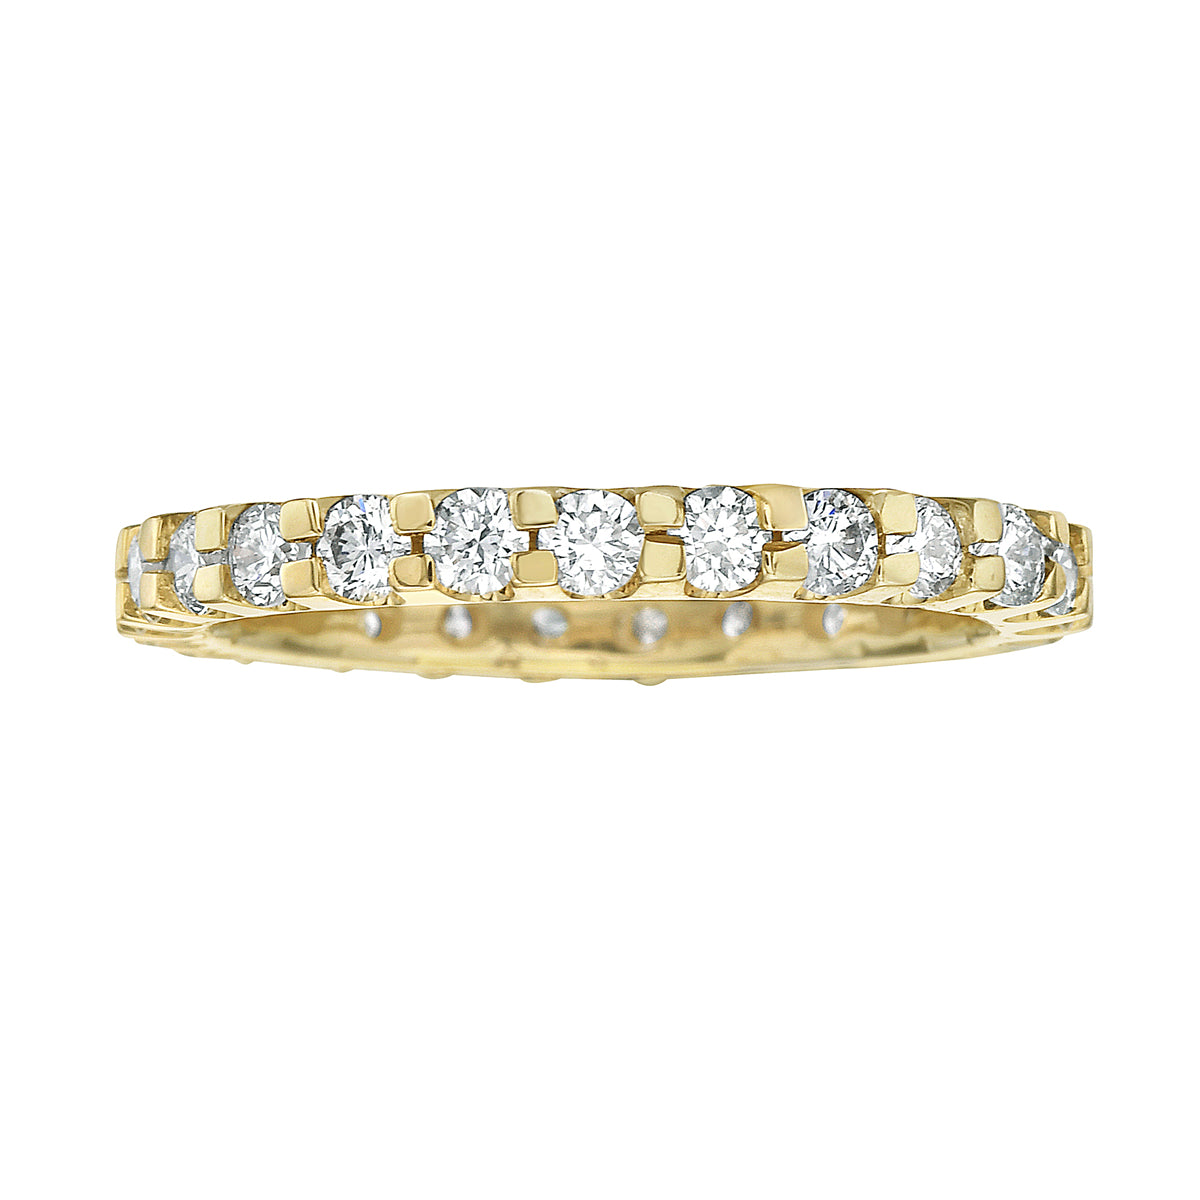 Ring 14KY 25RD-0.78CT Size-4